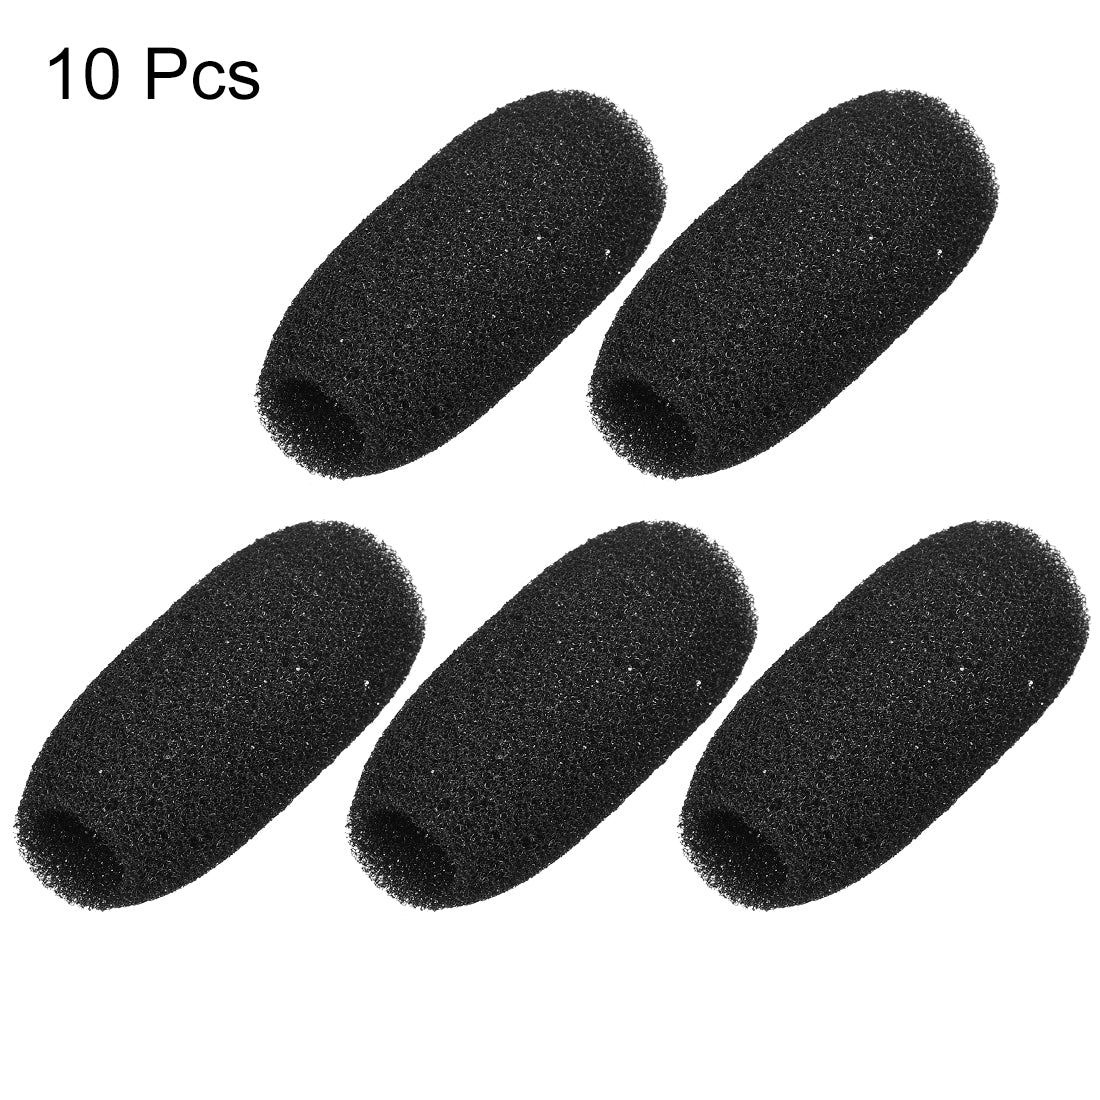 uxcell Uxcell 10PCS Sponge Foam Mic Cover Conference Microphone Windscreen Shield Protection Black 50mm Long